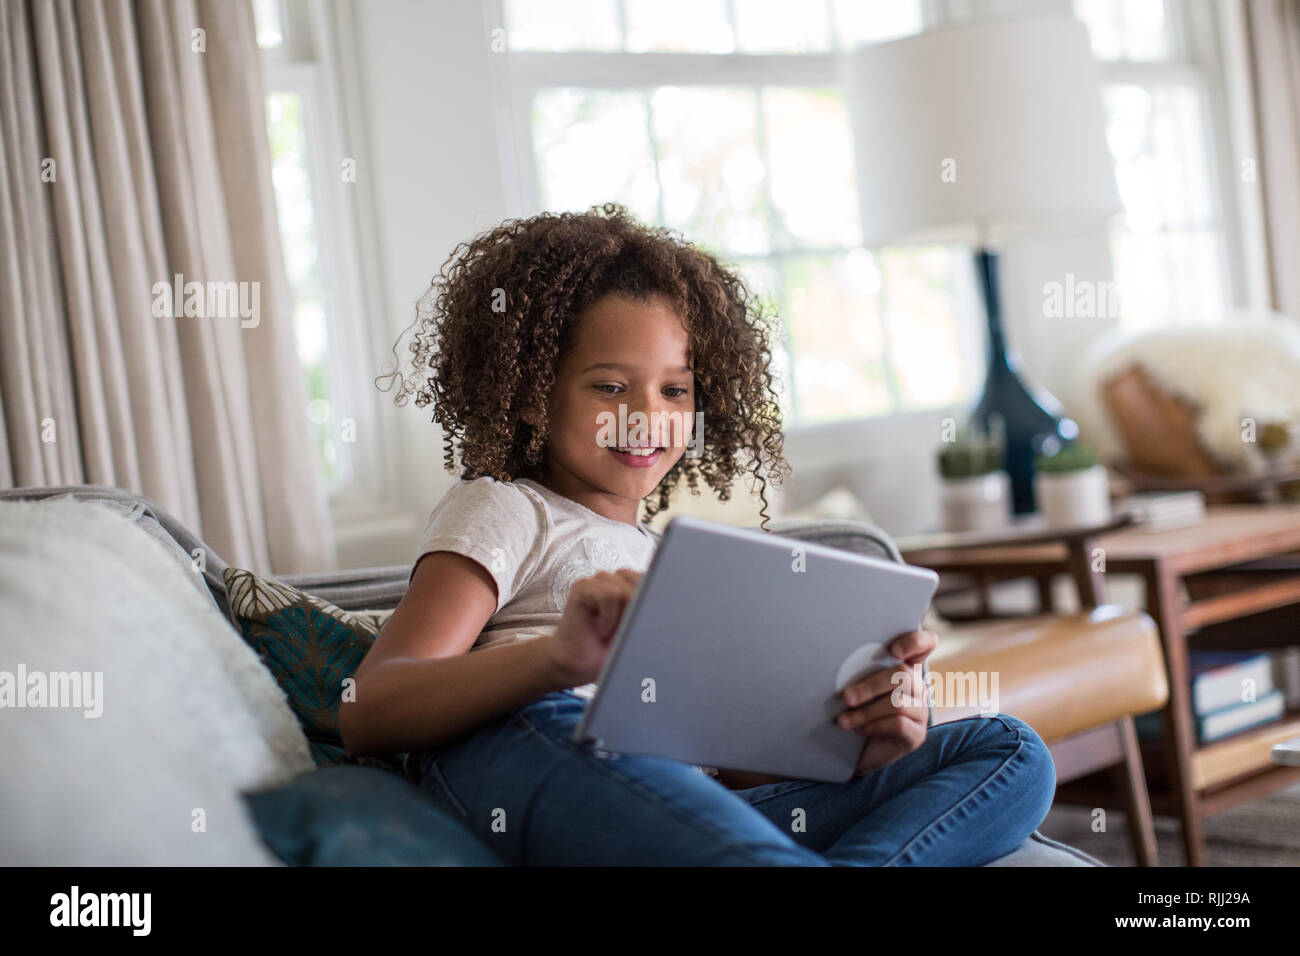 African American girl using digital tablet at home on sofa Stock Photo